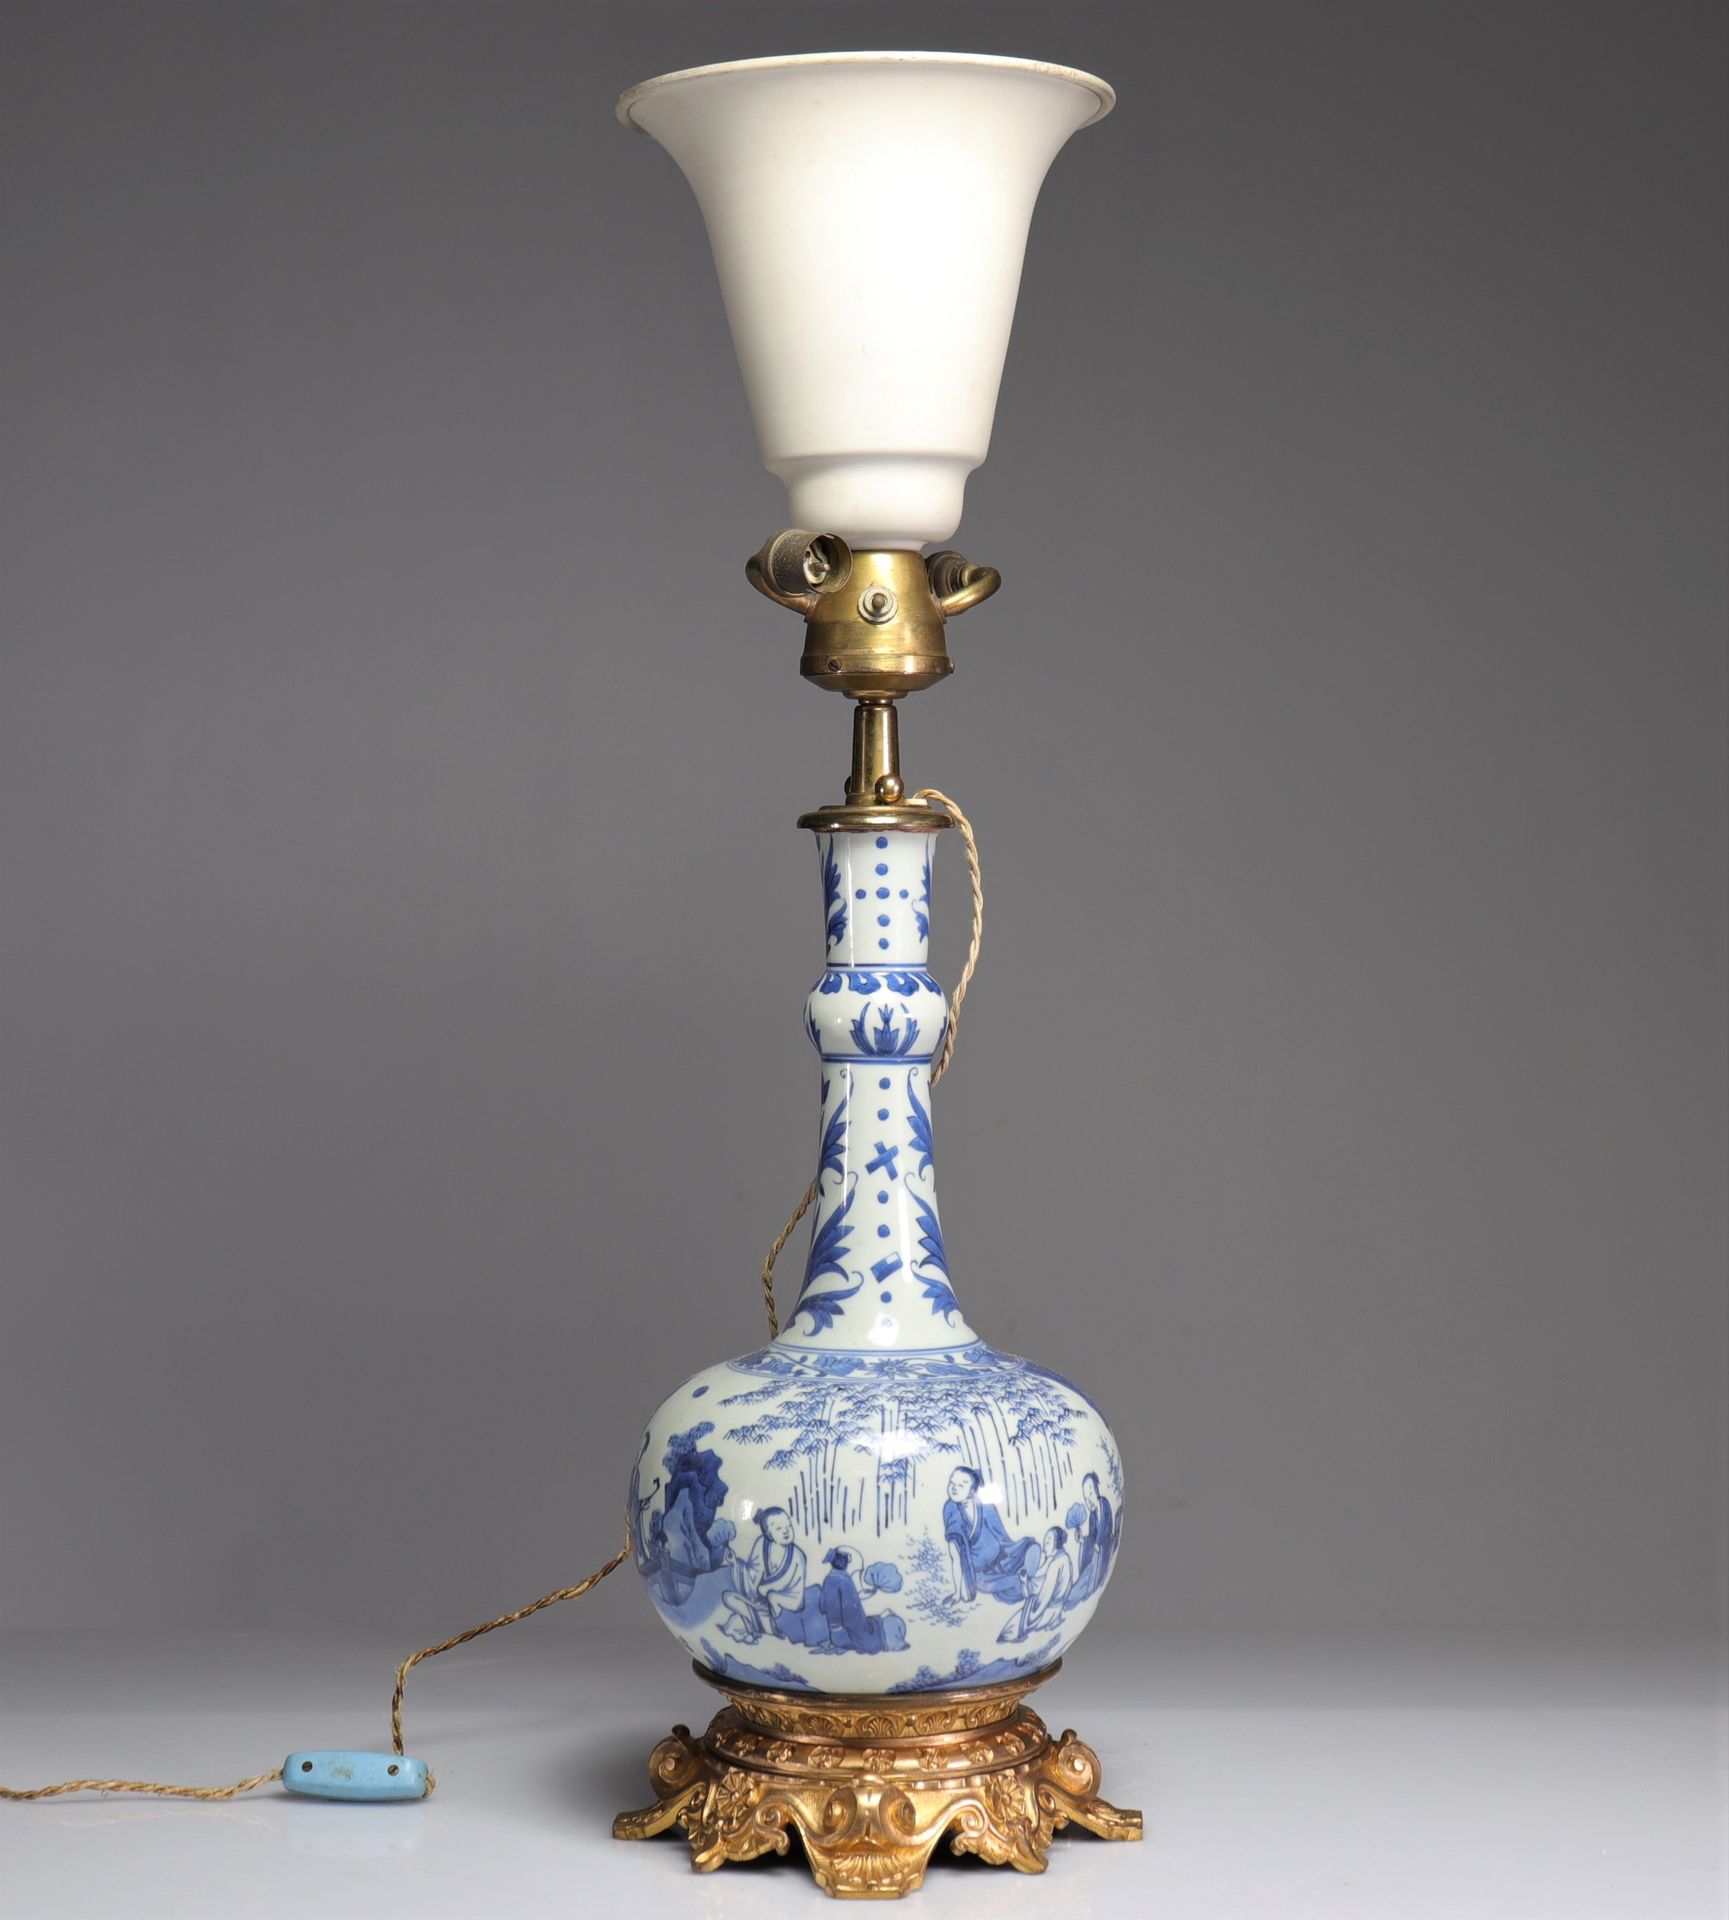 Null white-blue porcelain lamp, transition period
Weight: 4.90 kg
Region: China
&hellip;